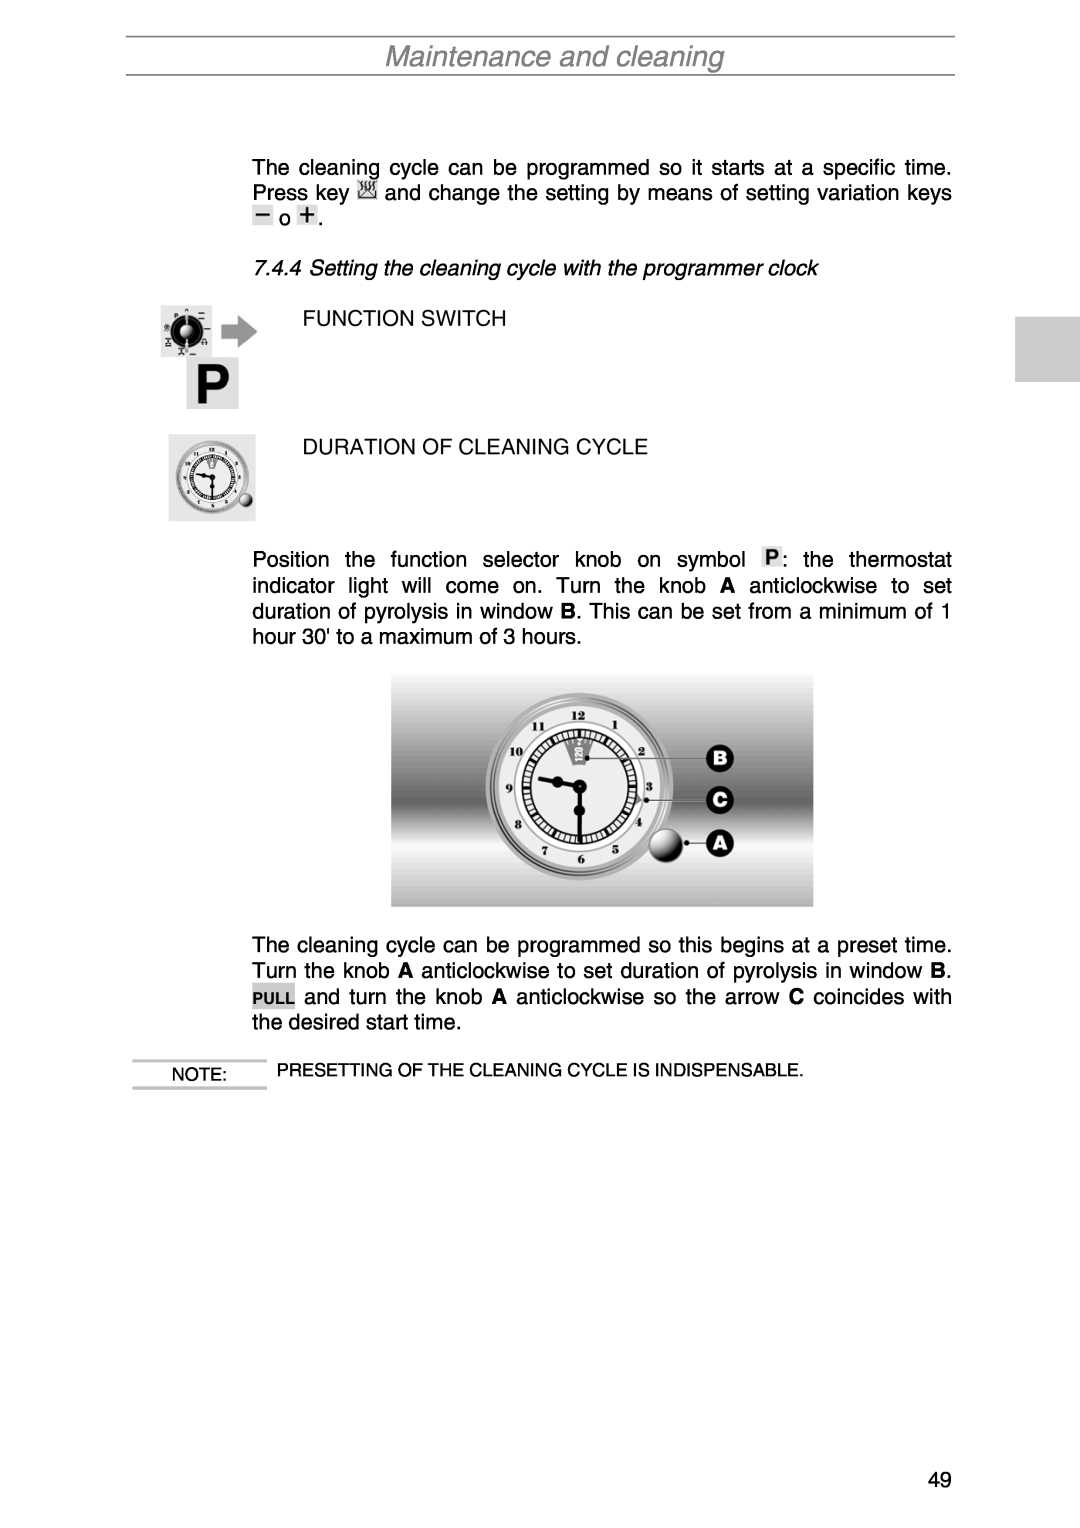 Smeg PIRO10NE manual Maintenance and cleaning, Setting the cleaning cycle with the programmer clock 